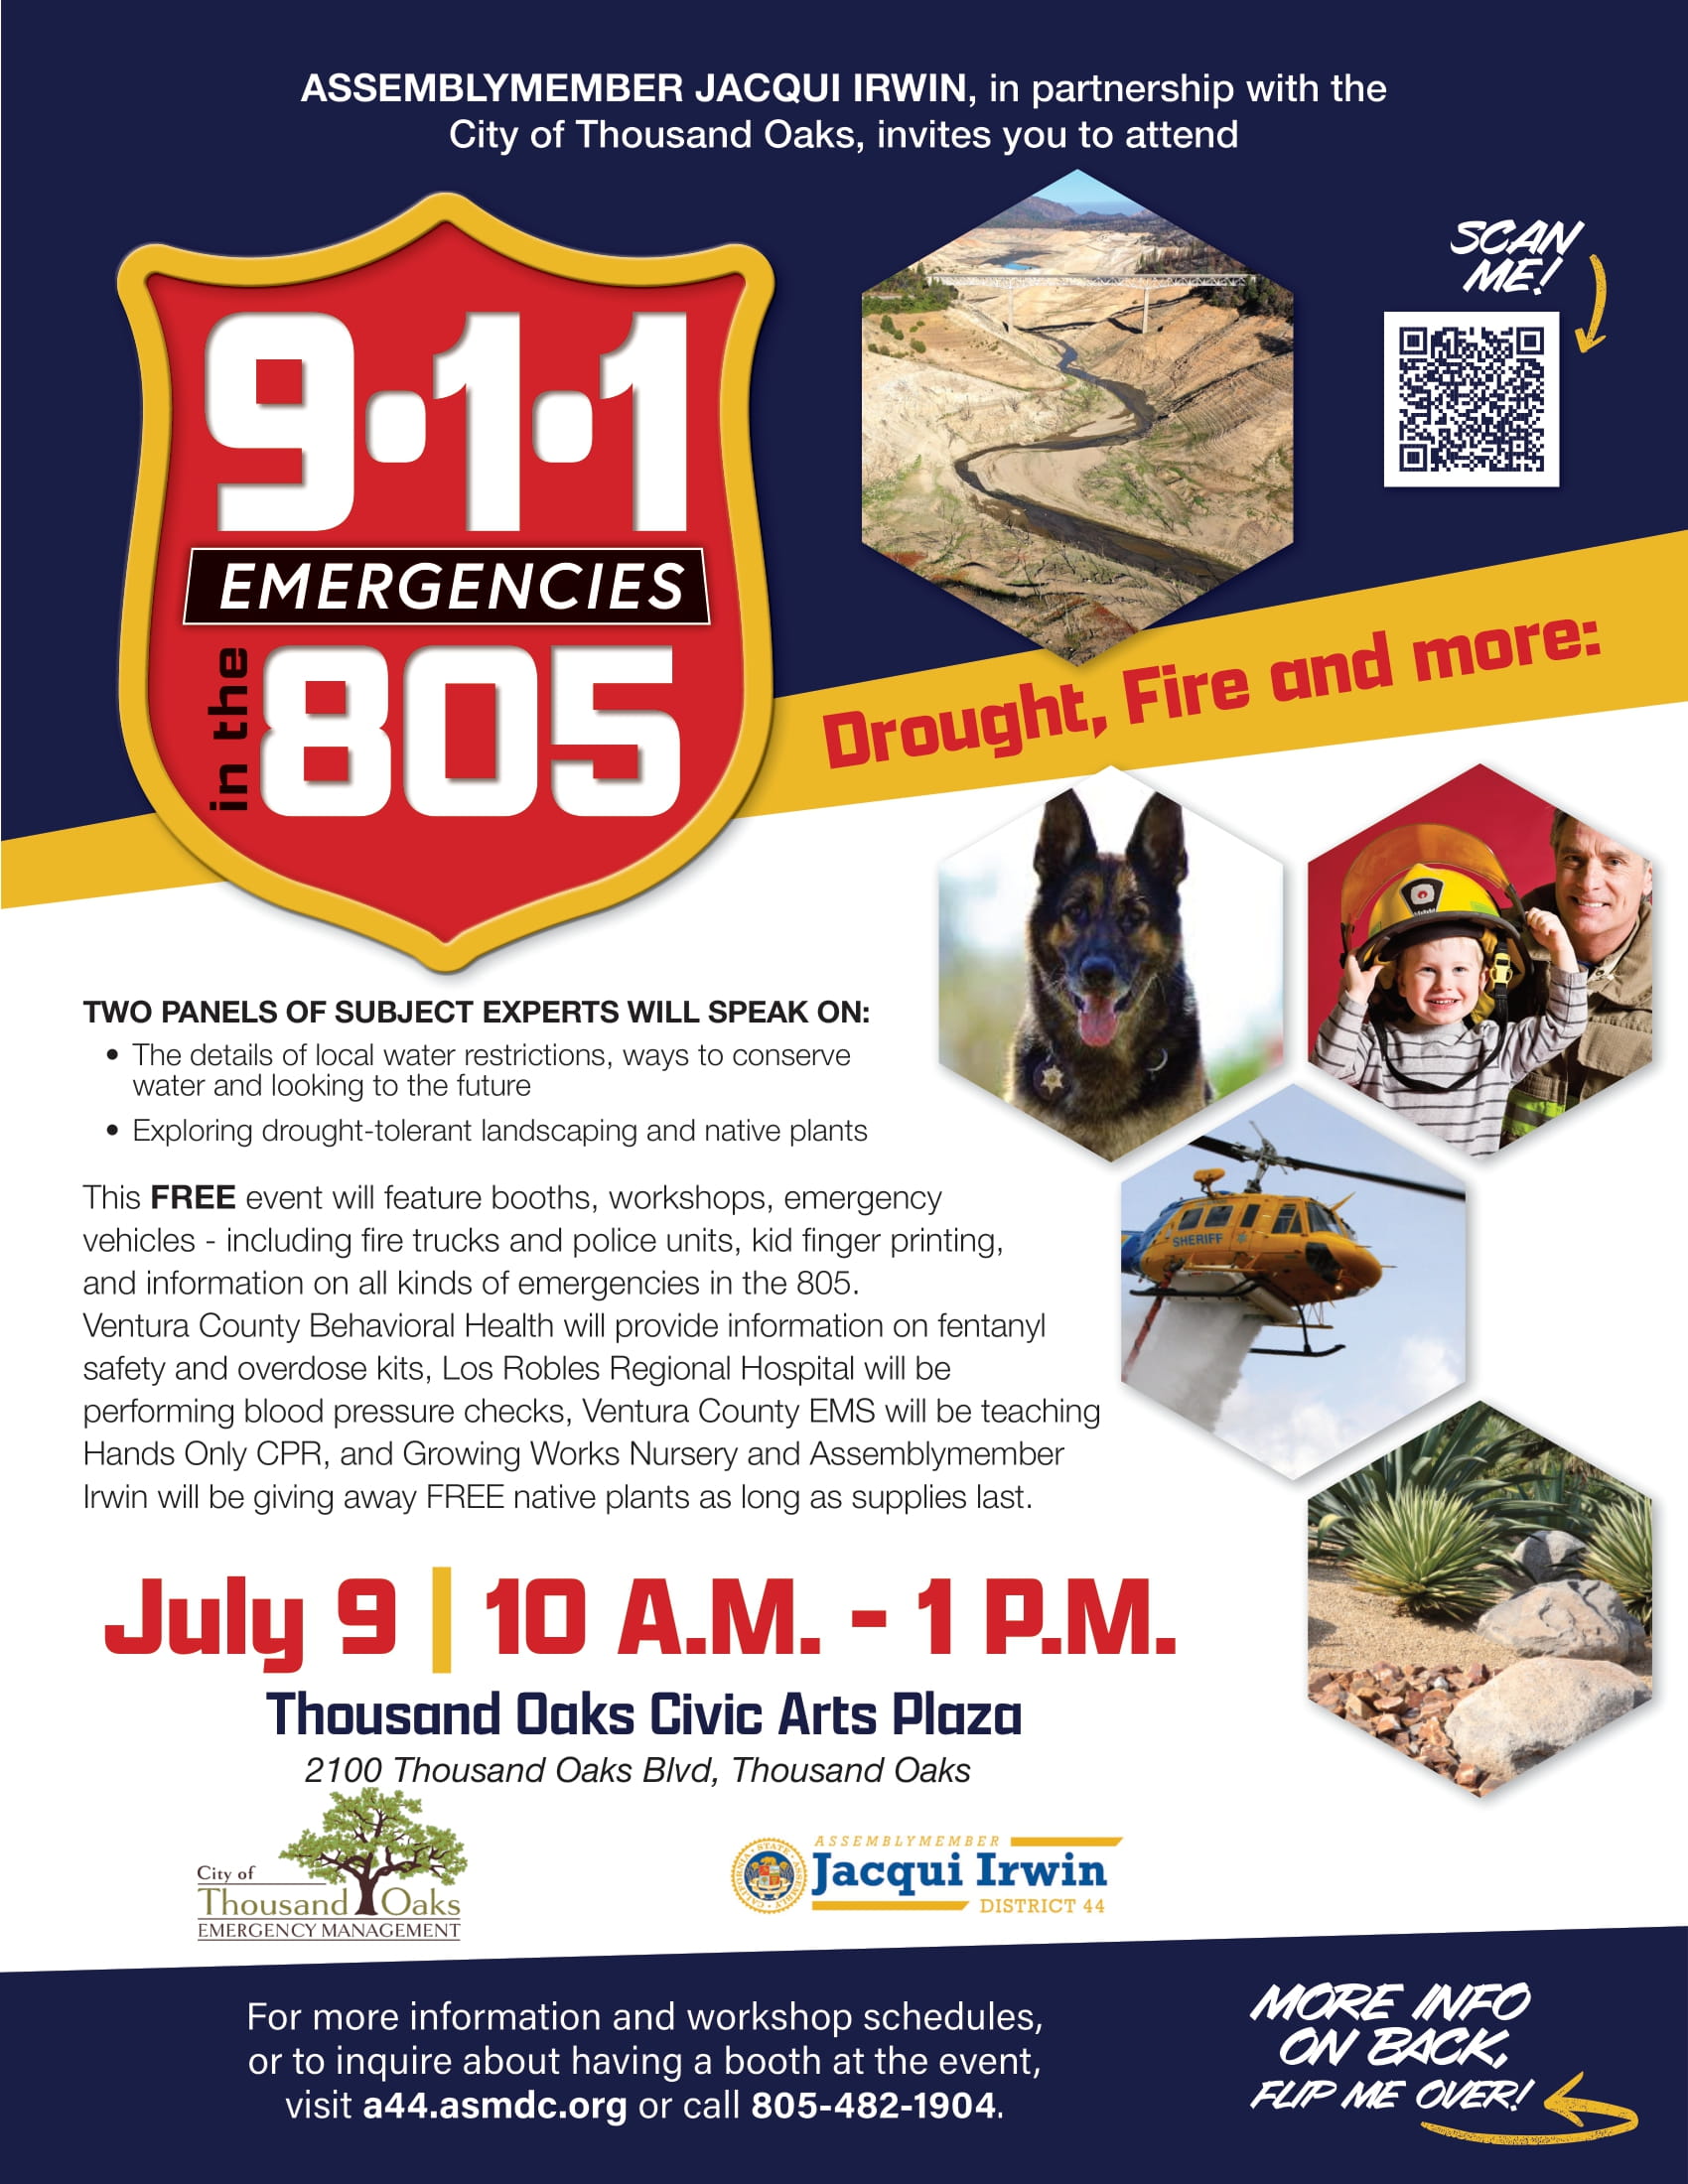 Assembly member Irwin and City of Thousand Oaks to host “911 Emergencies in the 805” Drought, Fire, and More